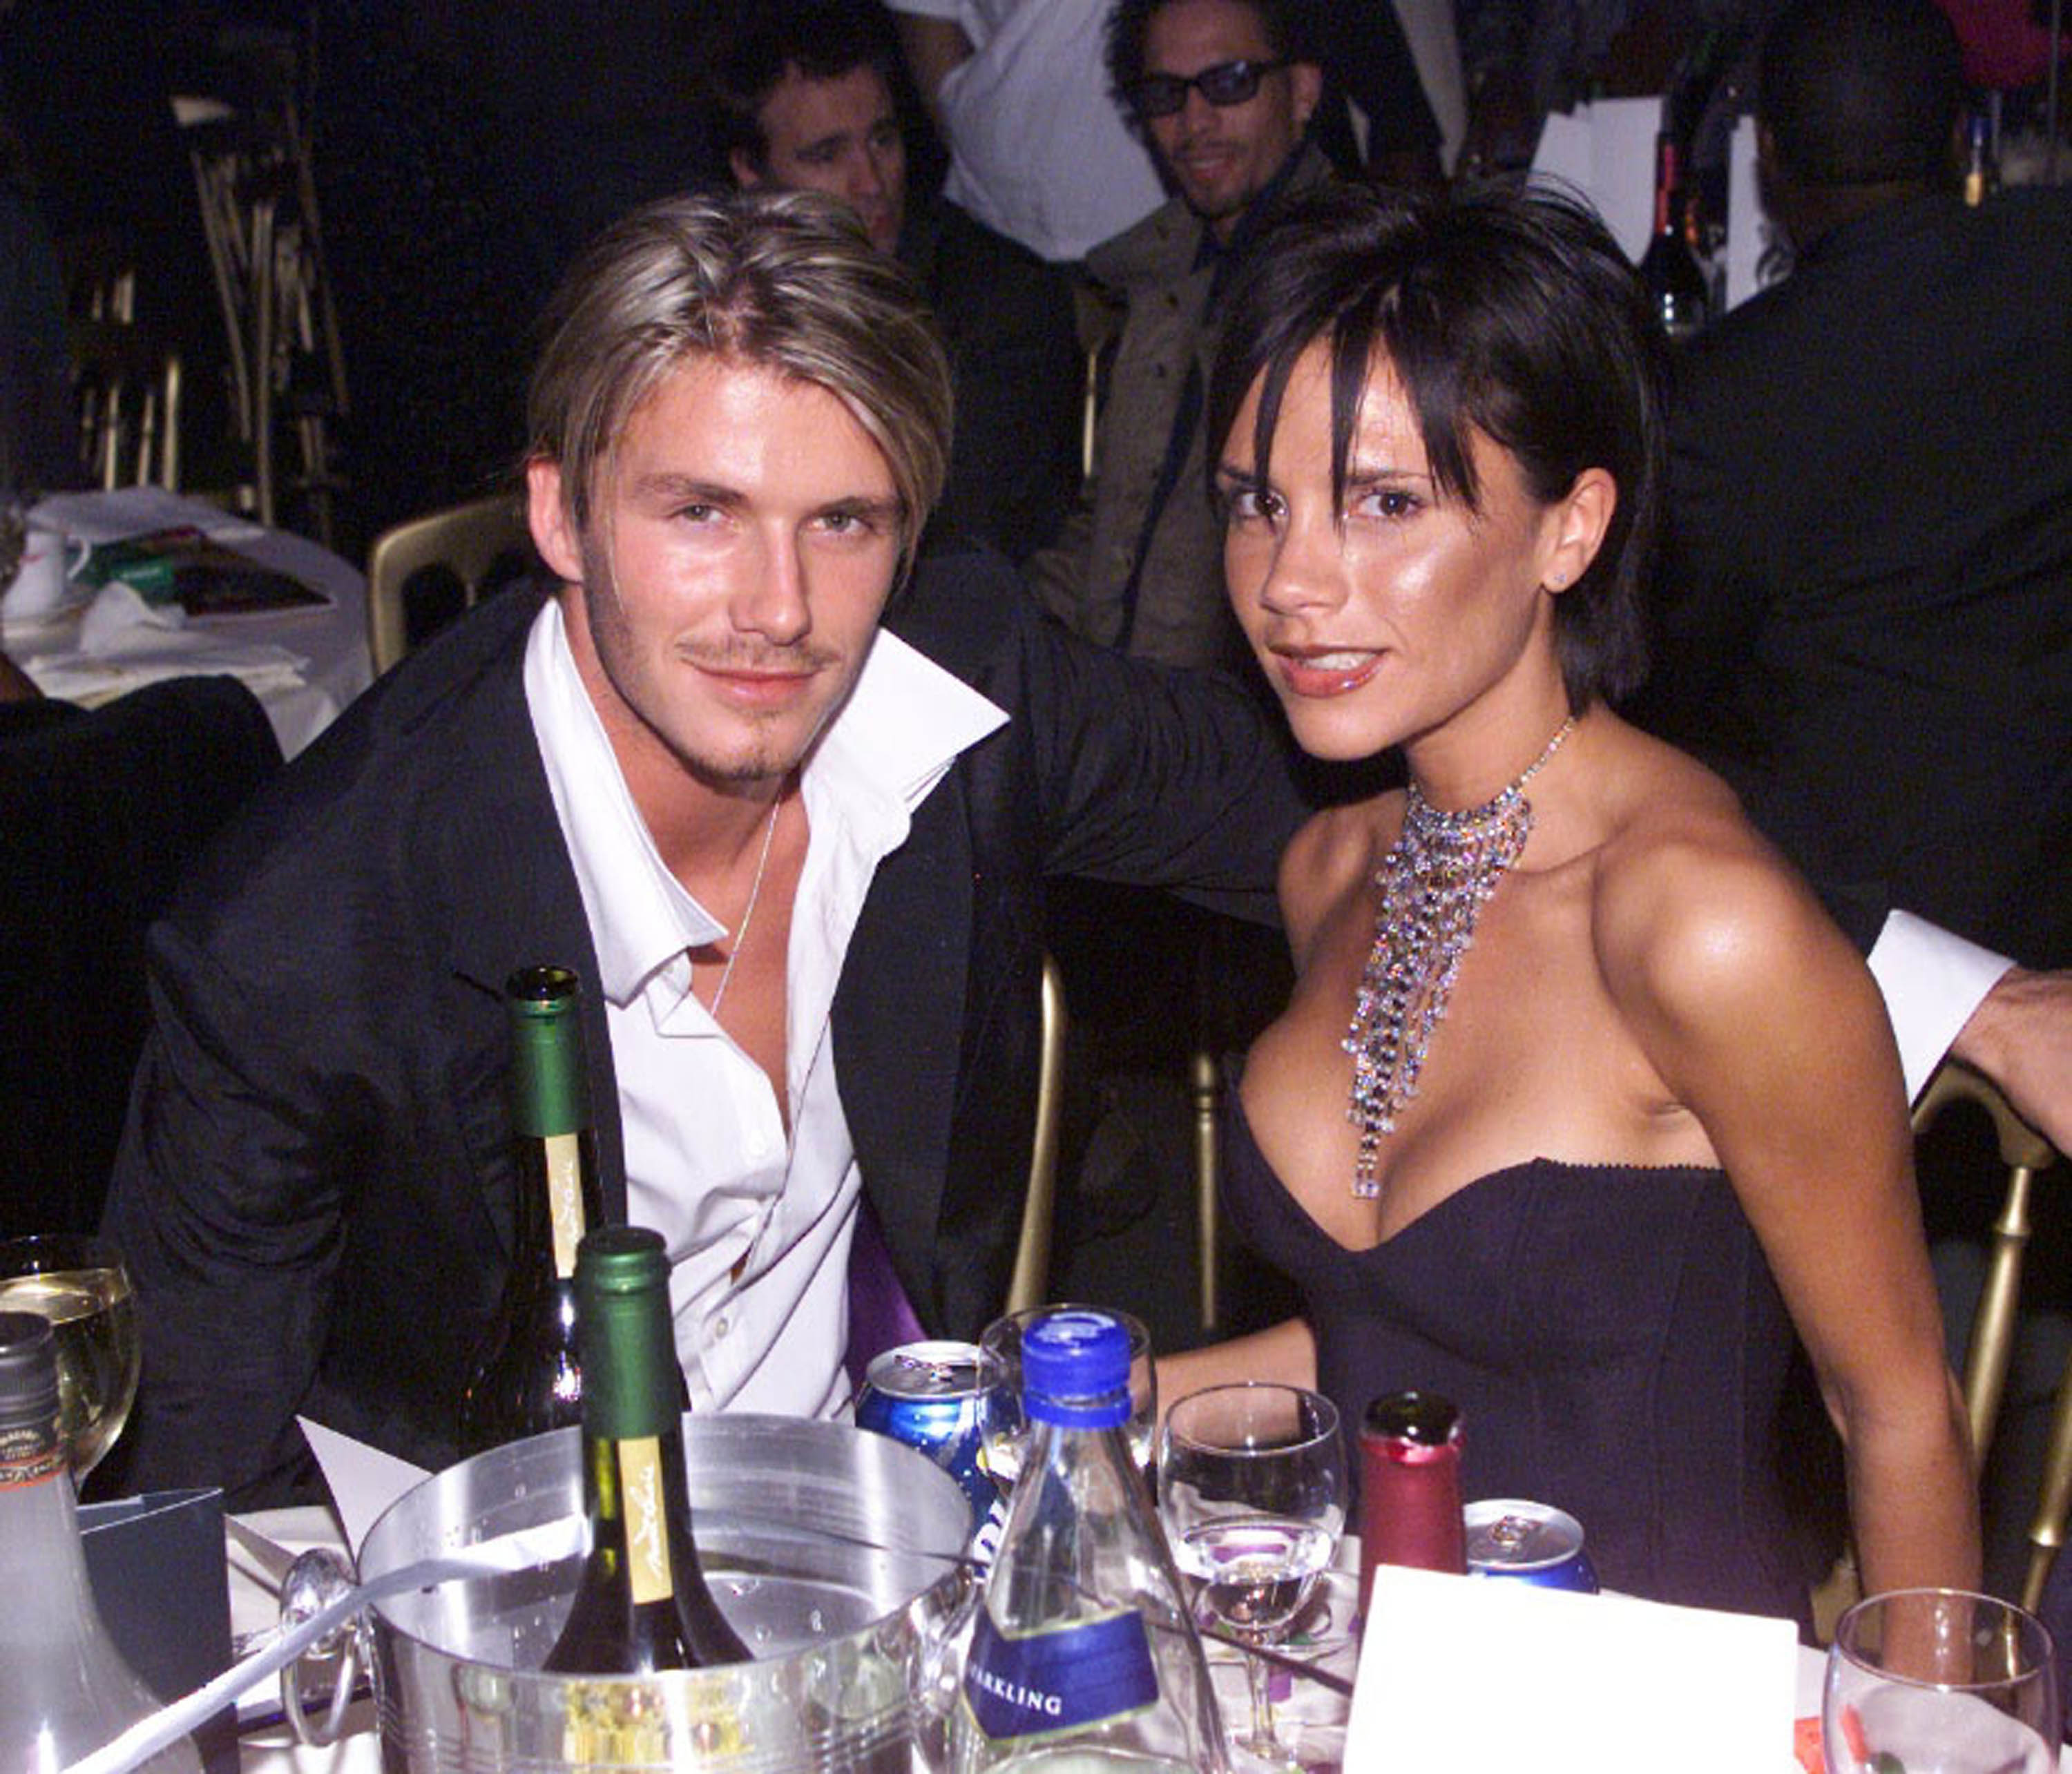 The best of Victoria and David Beckham's 90s style